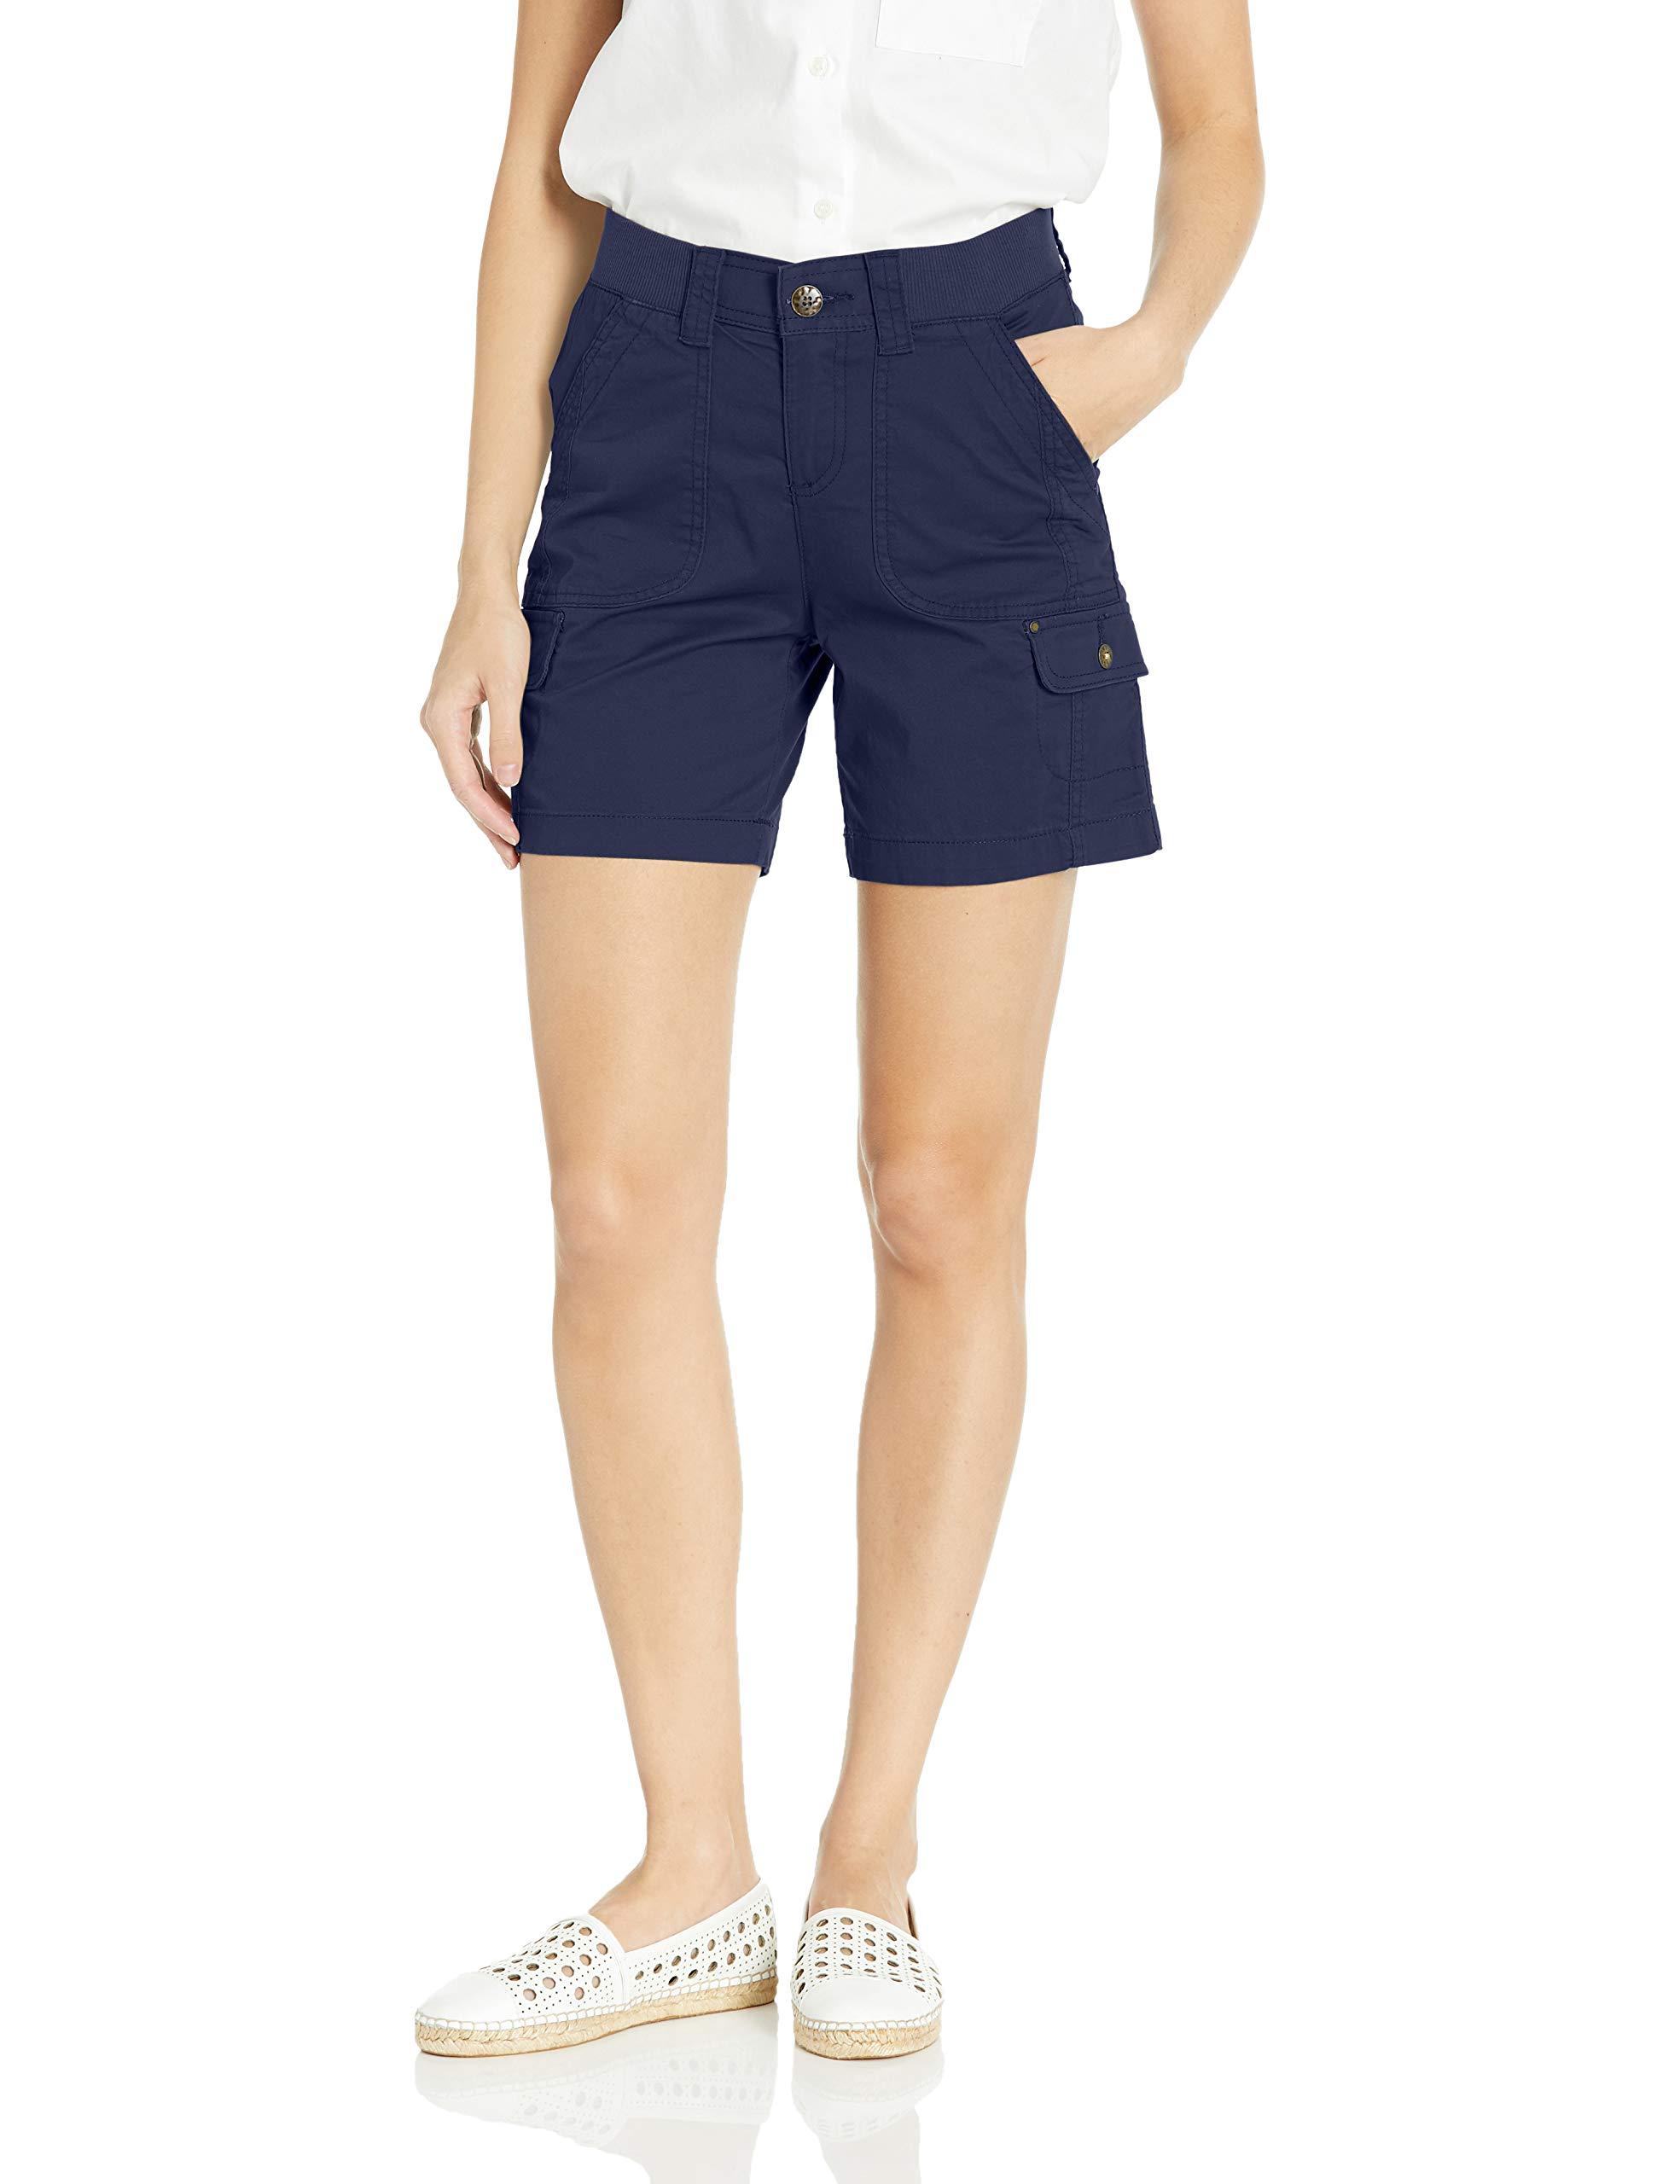 Lee Uniforms Womens Flex-to-go Relaxed Fit Cargo Short 